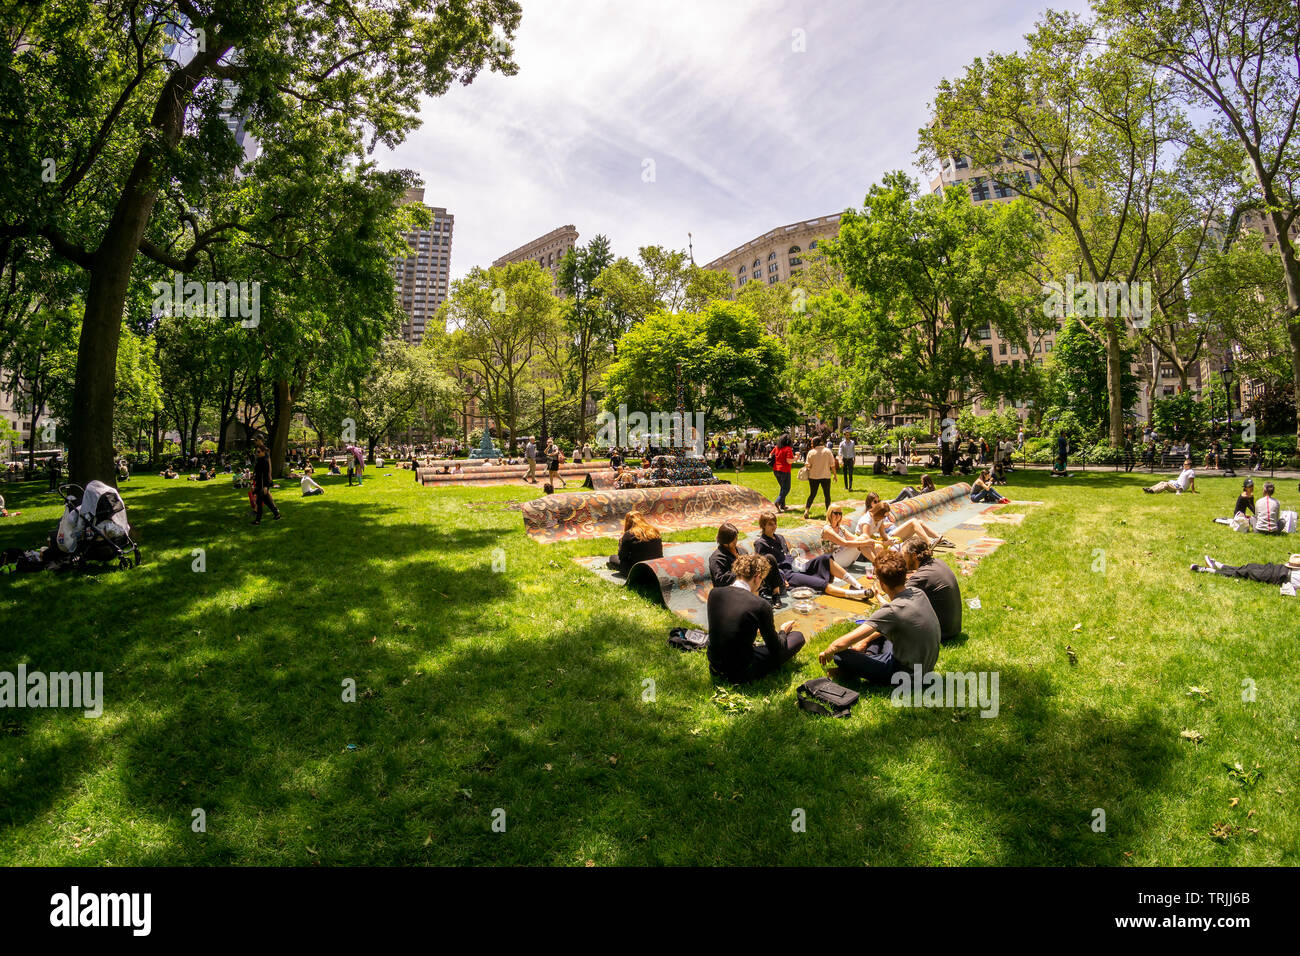 Visitors to Madison Square Park enjoy the warm weather by lounging on the sculpture “City in the Grass” by the artist Leonardo Drew on a warm Tuesday, June 4, 2019. The monumental public art commission presents a stylized cityscape over 100 feet long and provides an experiential activity, relaxing and lounging. The work will be on view and available for seating until December 15, 2019. (© Richard B. Levine) Stock Photo